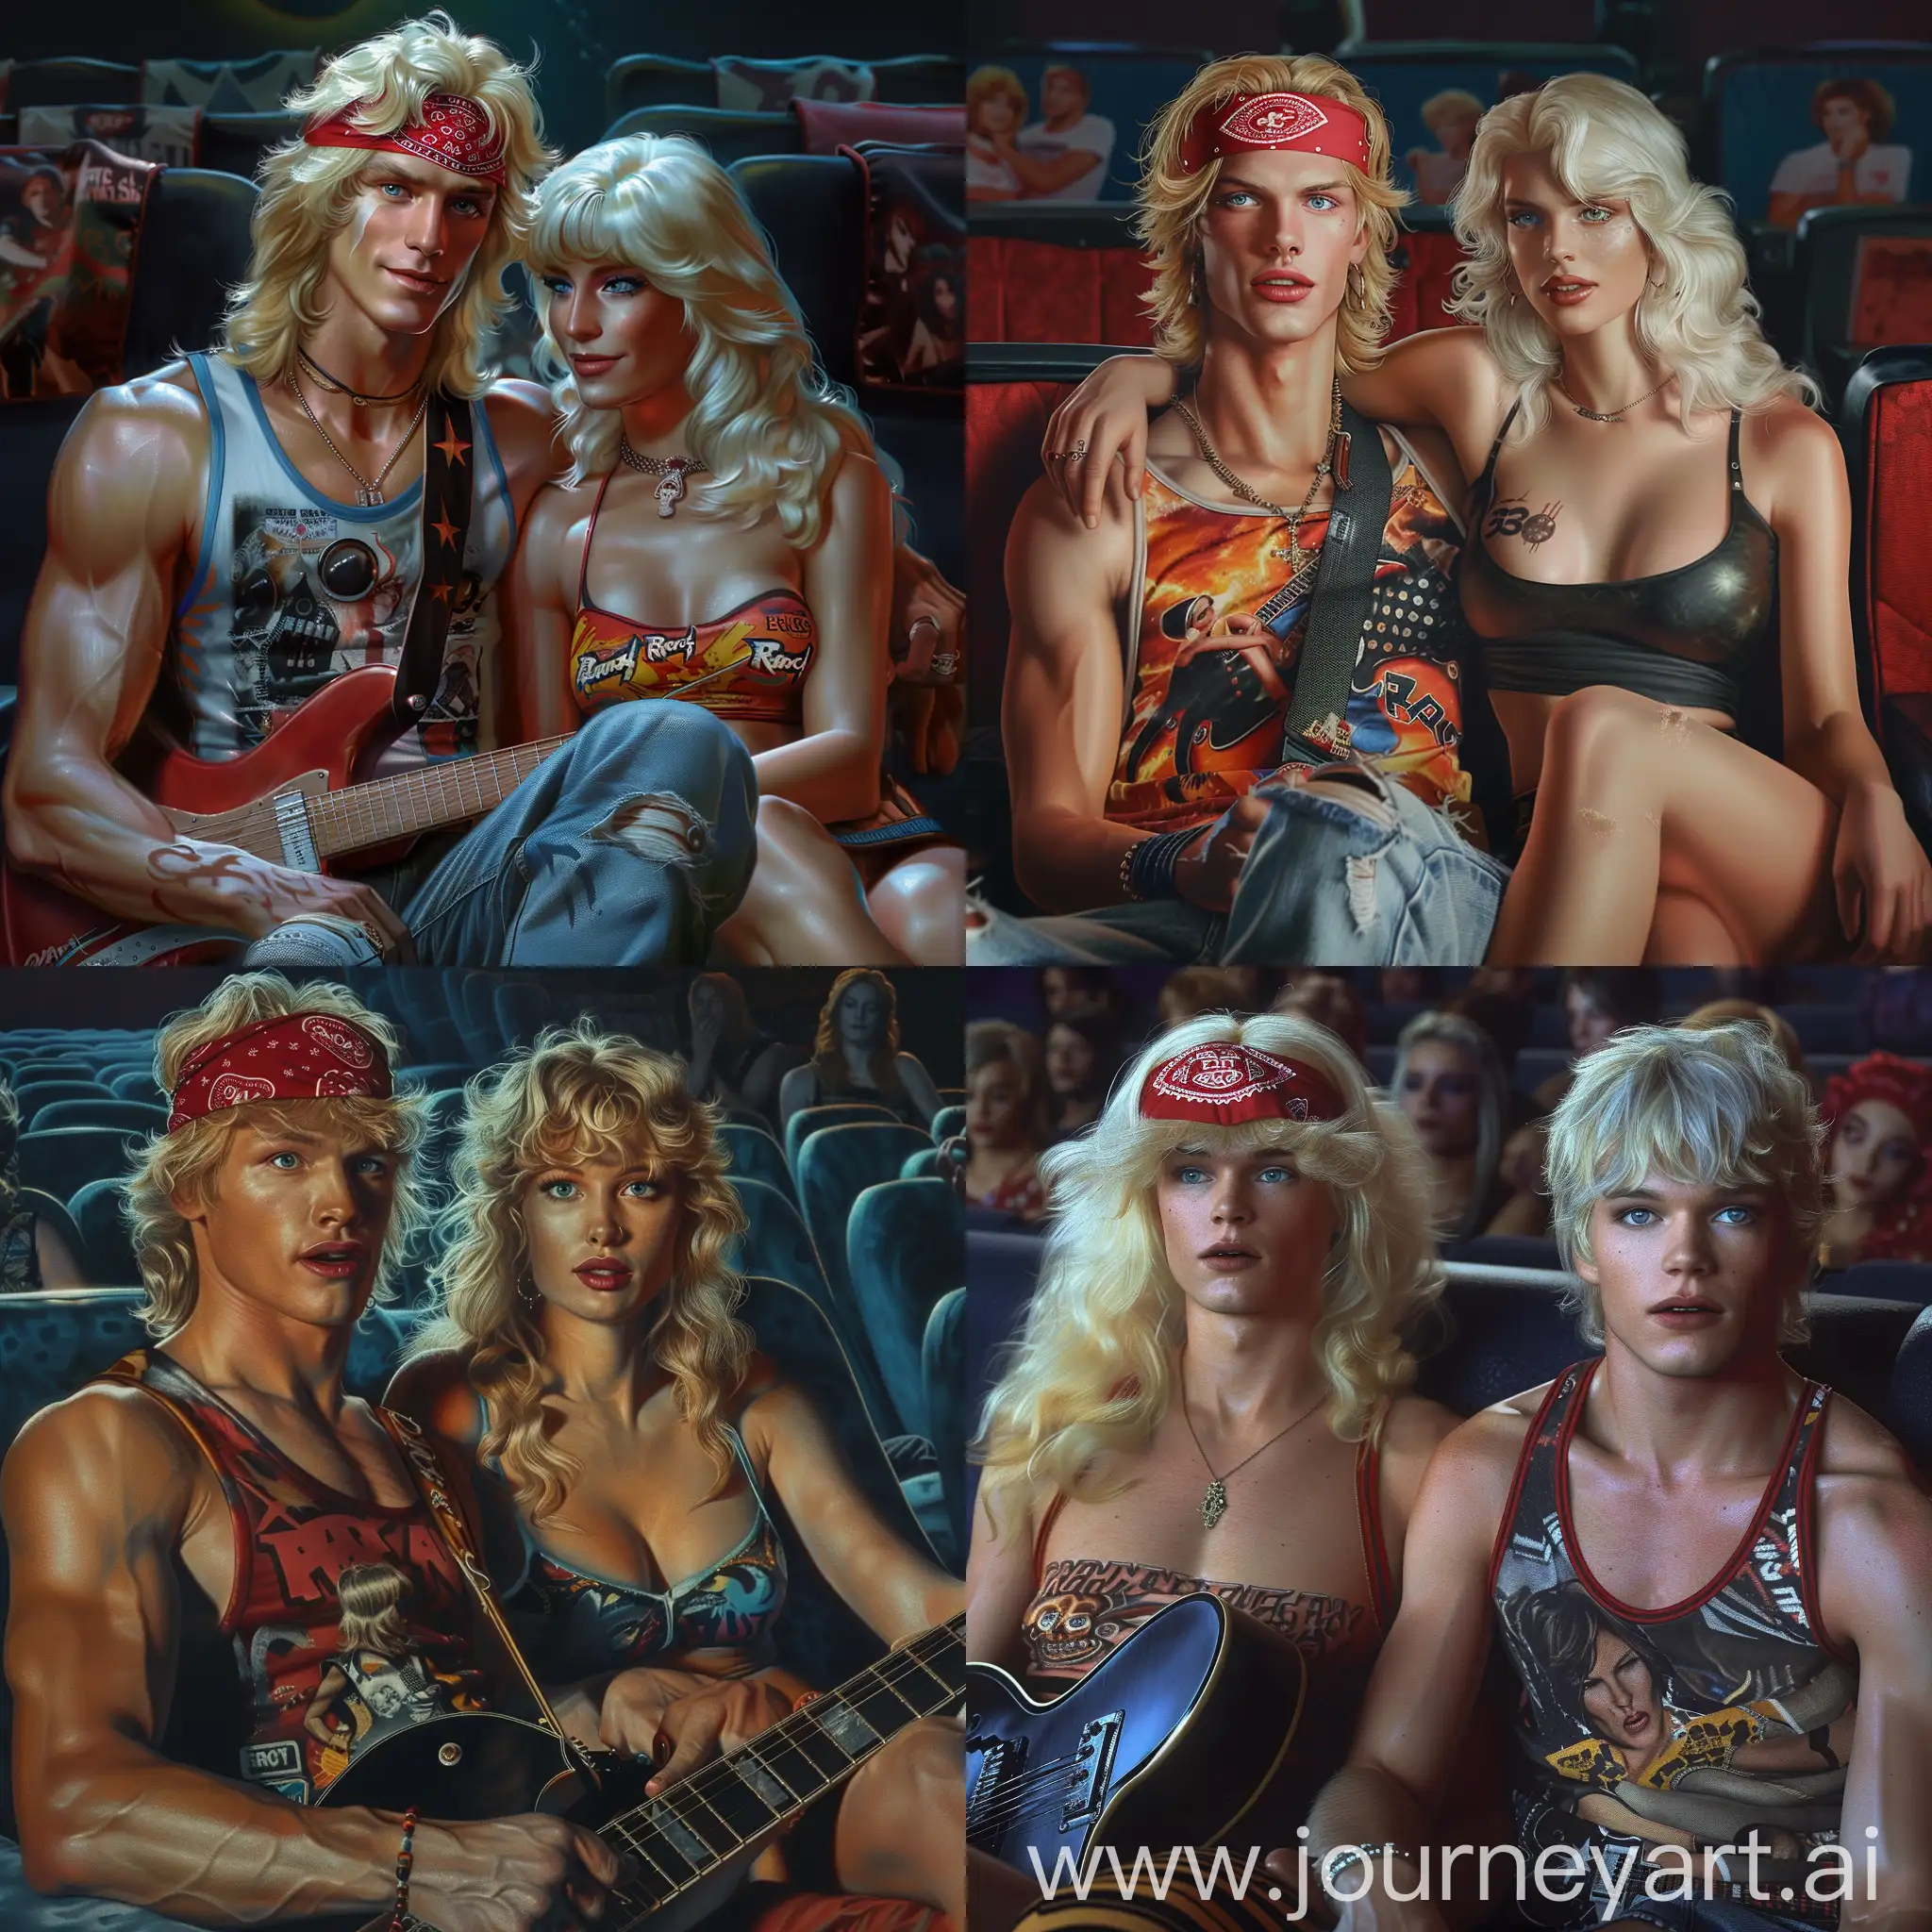 A 25 year old man in the 80s with blonde mullet hair and blue eyes with a red bandana on his head, wearing a tank top with a guitar and hard rock print, sitting on a couch with his white girlfriend who has a blonde mullet hair and blue eyes, with beautiful curves and Hard Rock clothes, watching a movie in the cinema in a photorealistic style.